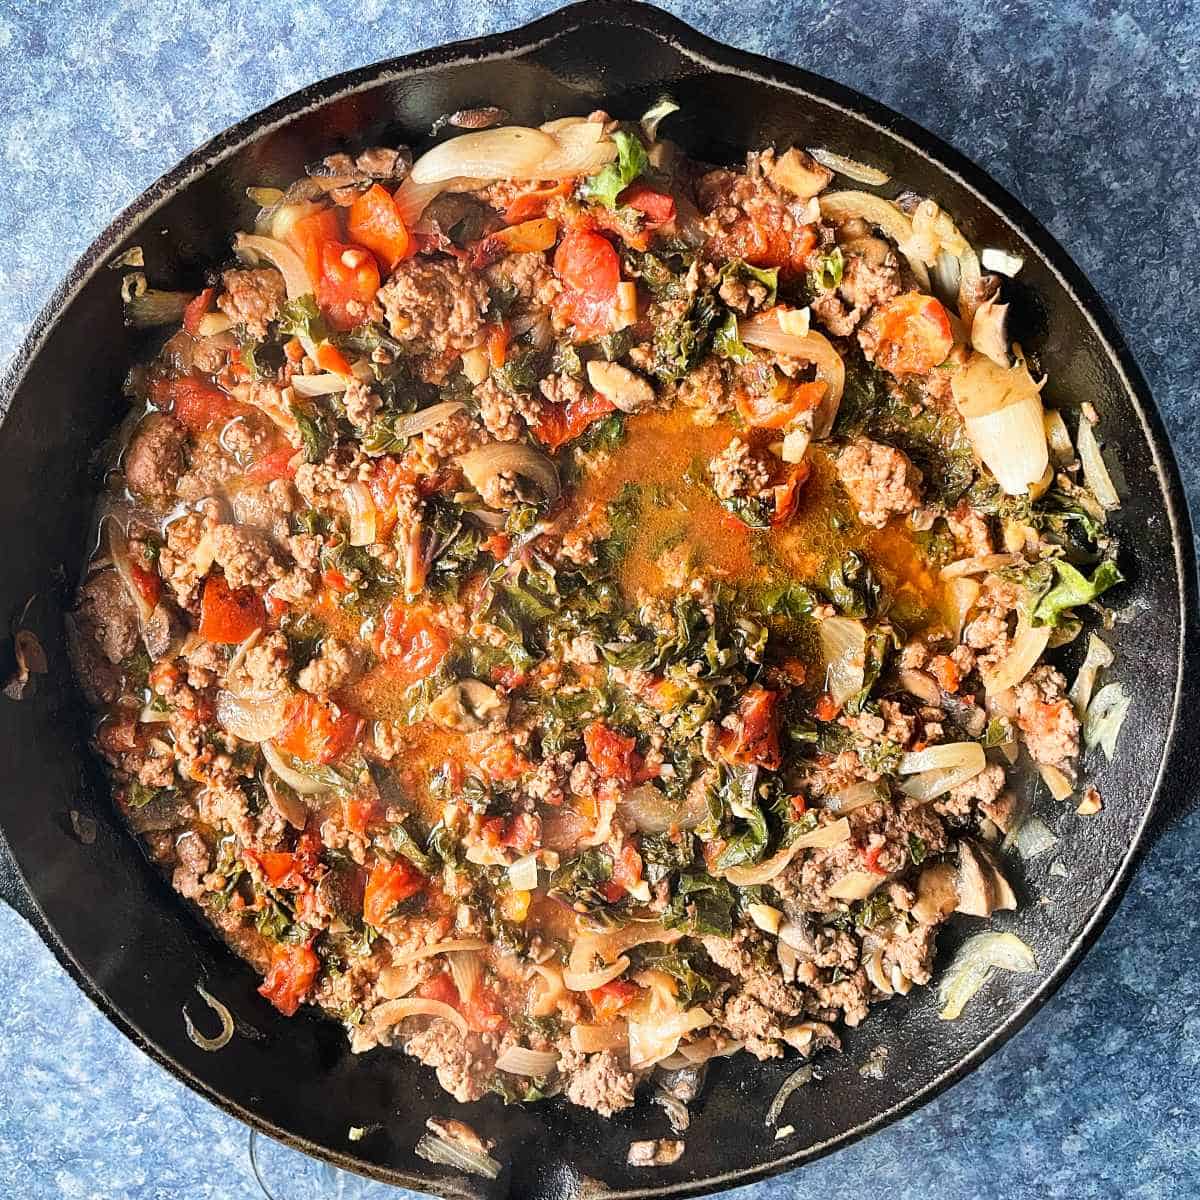 ground beef and kale along with tomatoes in a large black skillet.